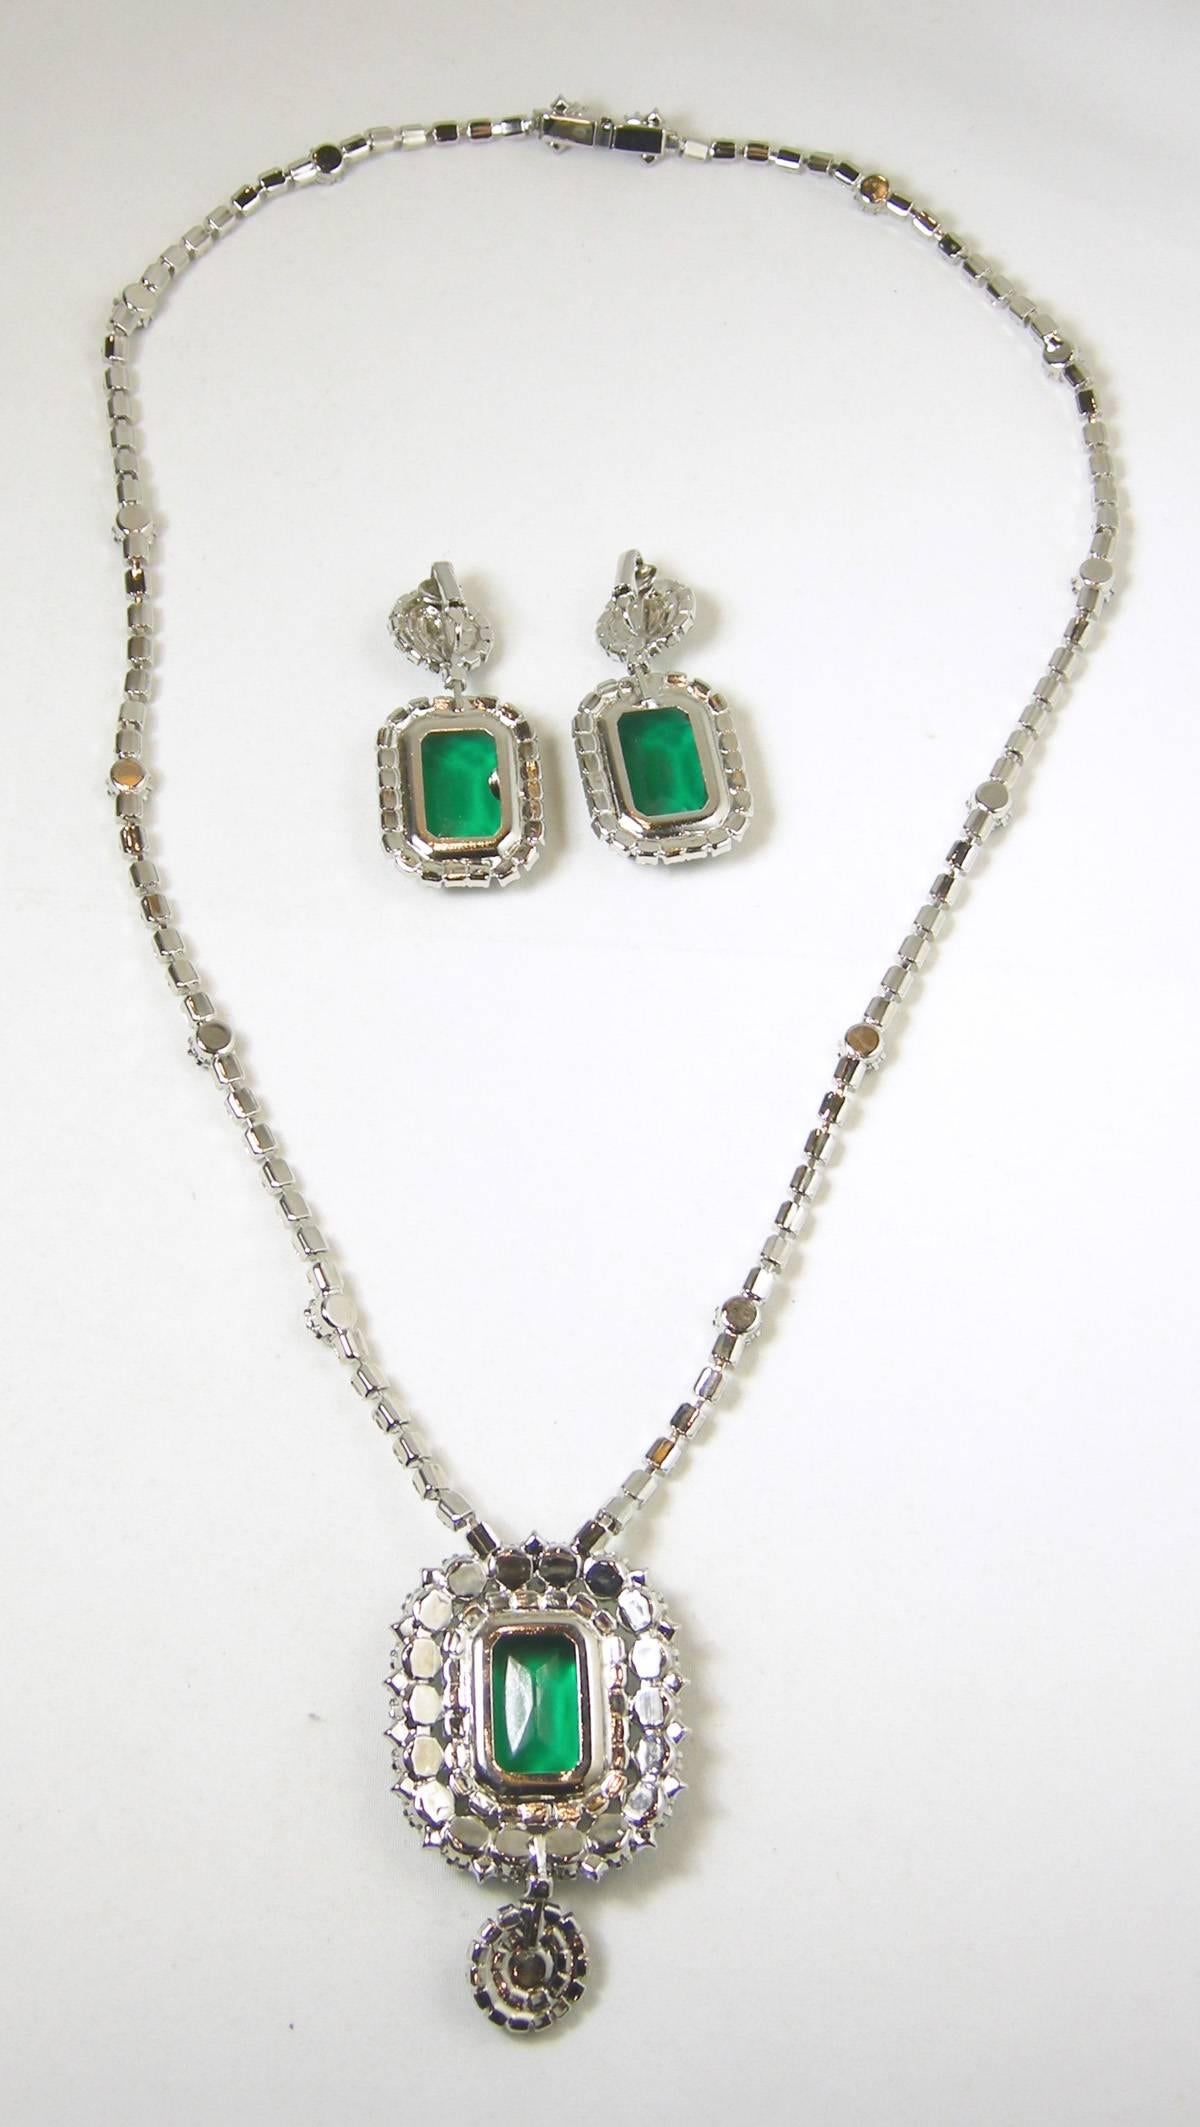 This is an absolutely stunning collection. It features a Faux emerald green and clear rhinestone statement necklace. The pendant necklace features a large emerald cut glass rhinestone that has brilliantly clear sparkly rhinestones surrounding and